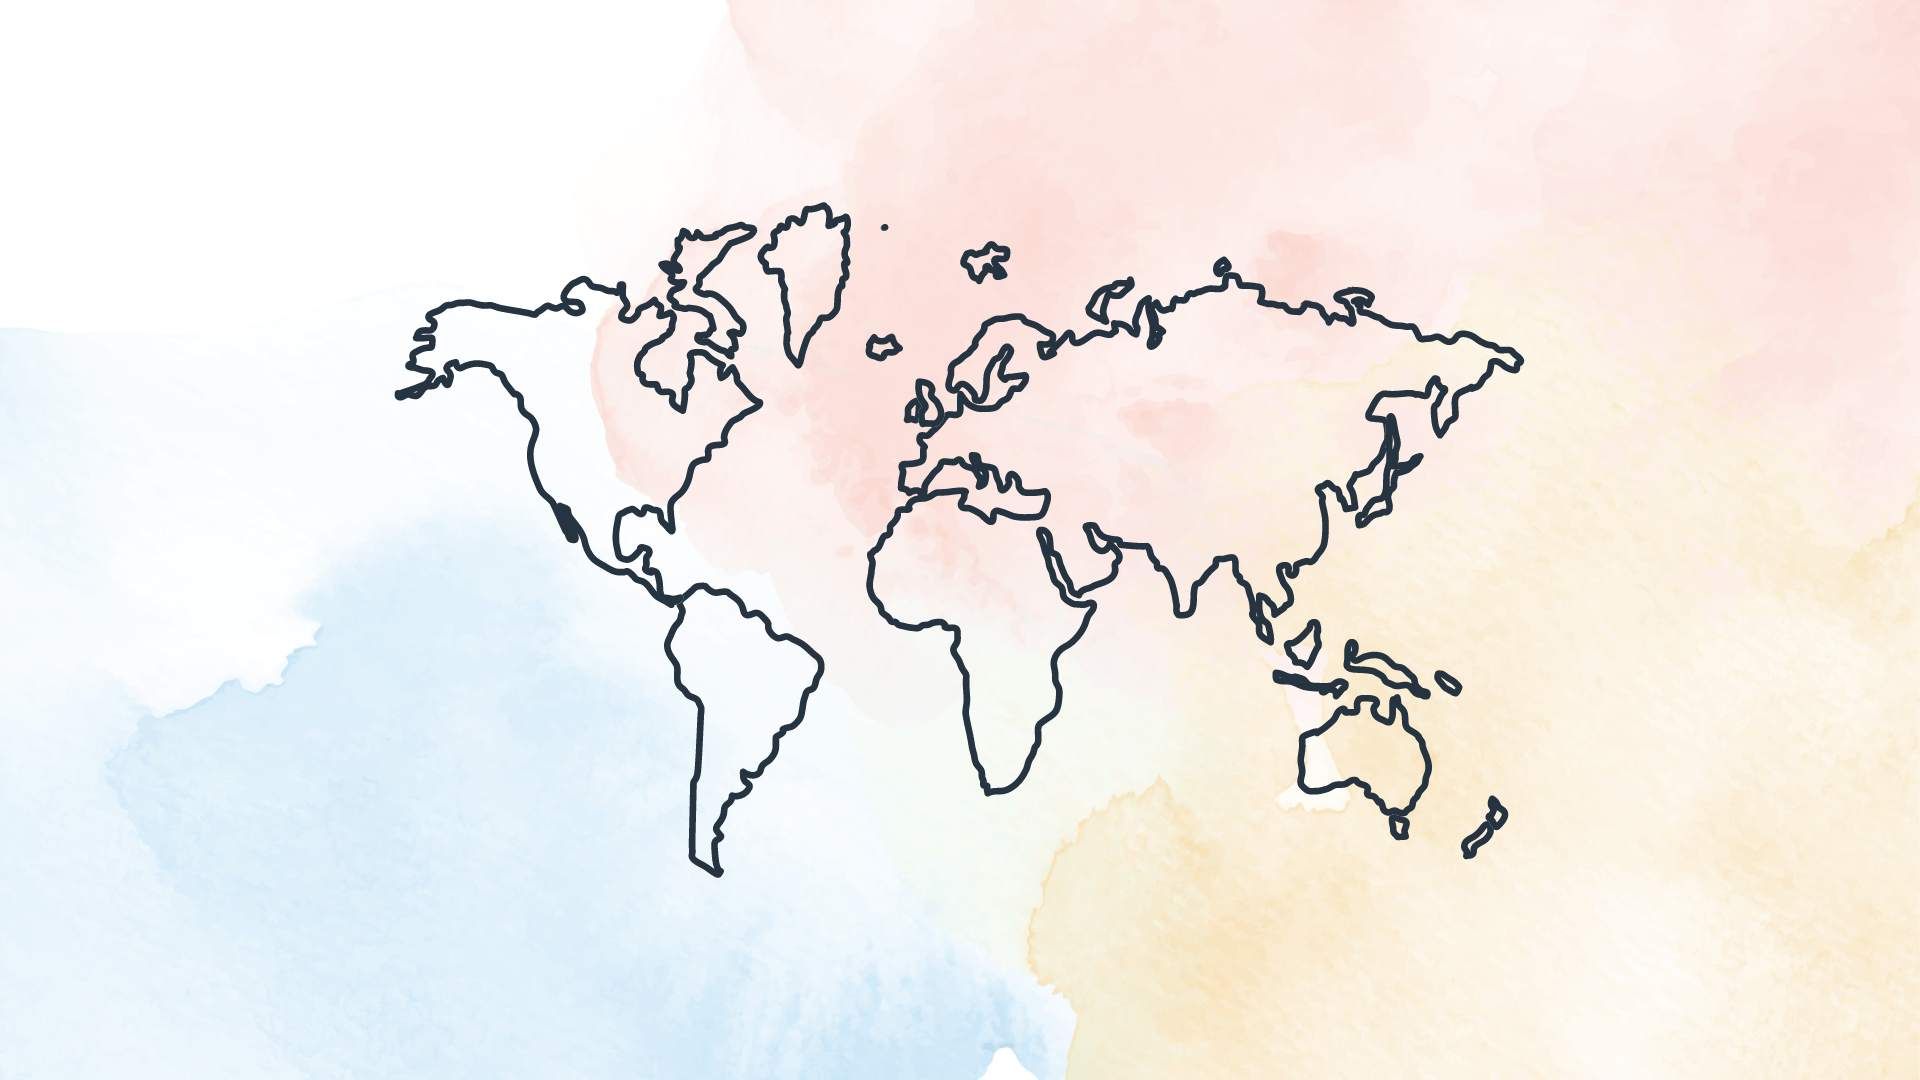 Outline of the world map. The background is white with some light blue, yellow and red watercolor drops.